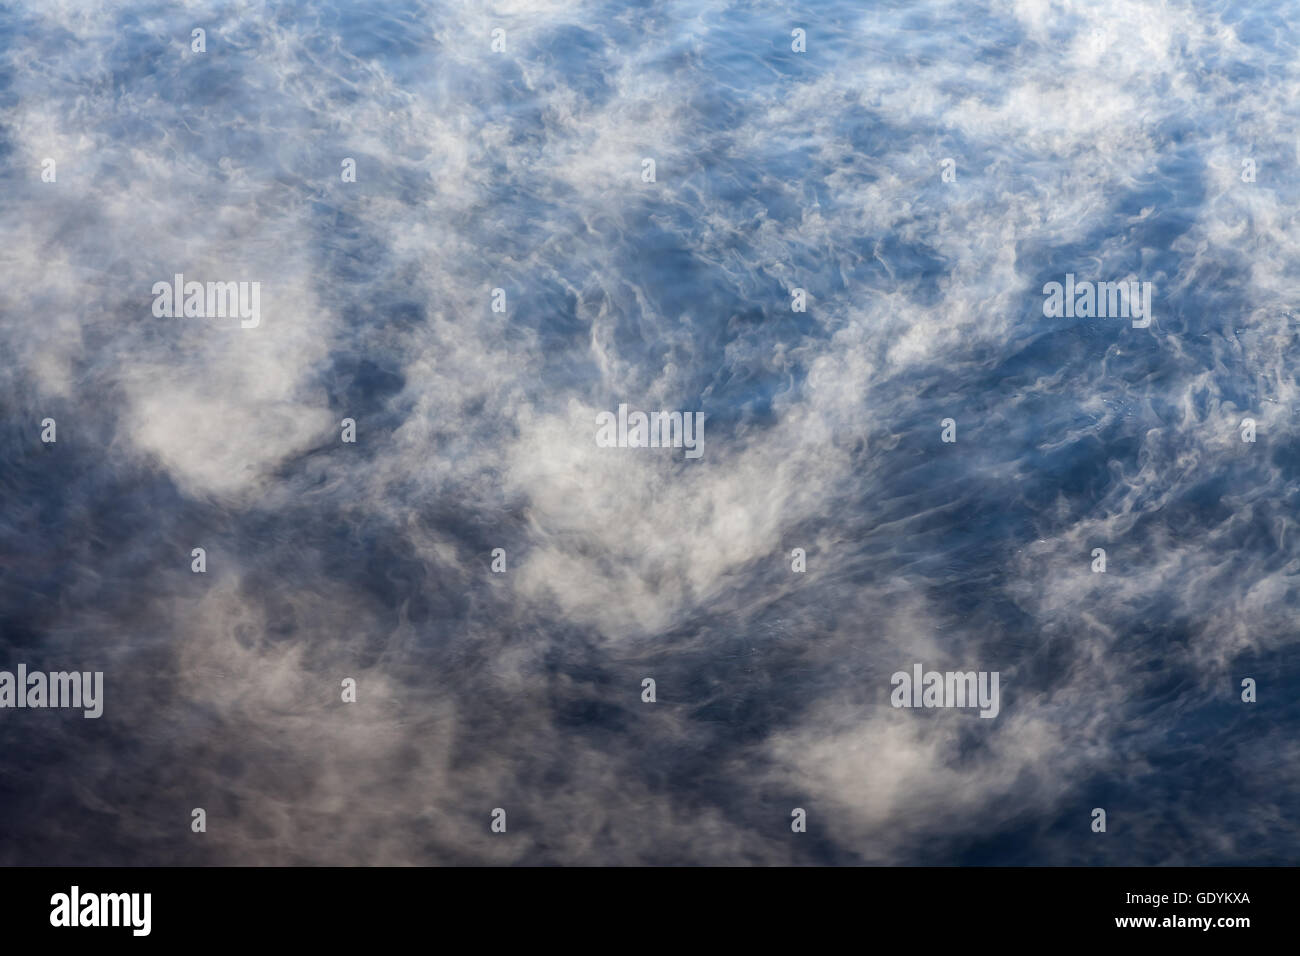 Water vapor on surface of cold icy water at sunny cold winter day Stock Photo